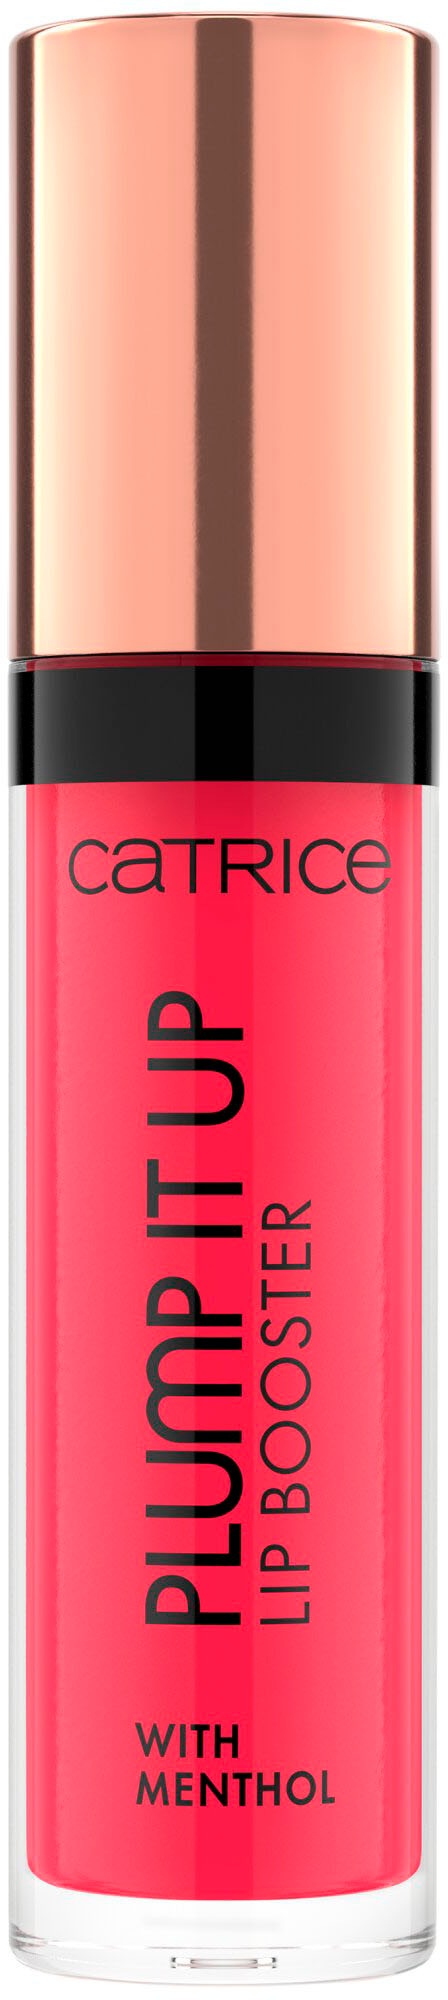 It 3 Lip-Booster »Plump | UNIVERSAL Booster«, online Catrice Lip Up (Set, tlg.) kaufen